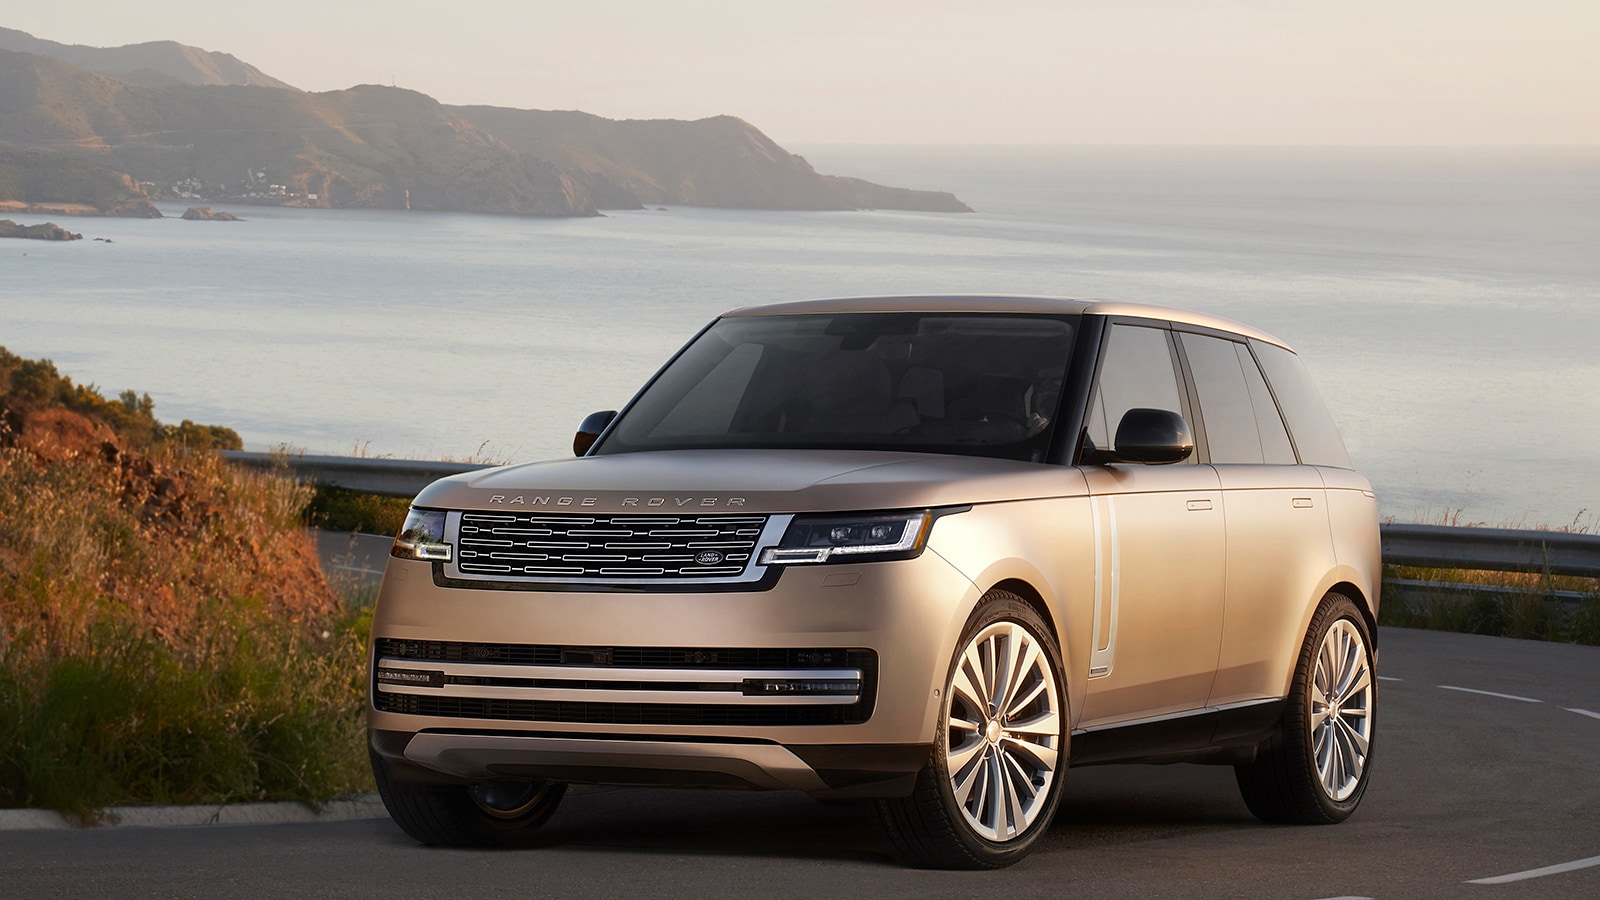 New 2024 Range Rover For Sale in Bedford, NH Range Rover Lease Deals